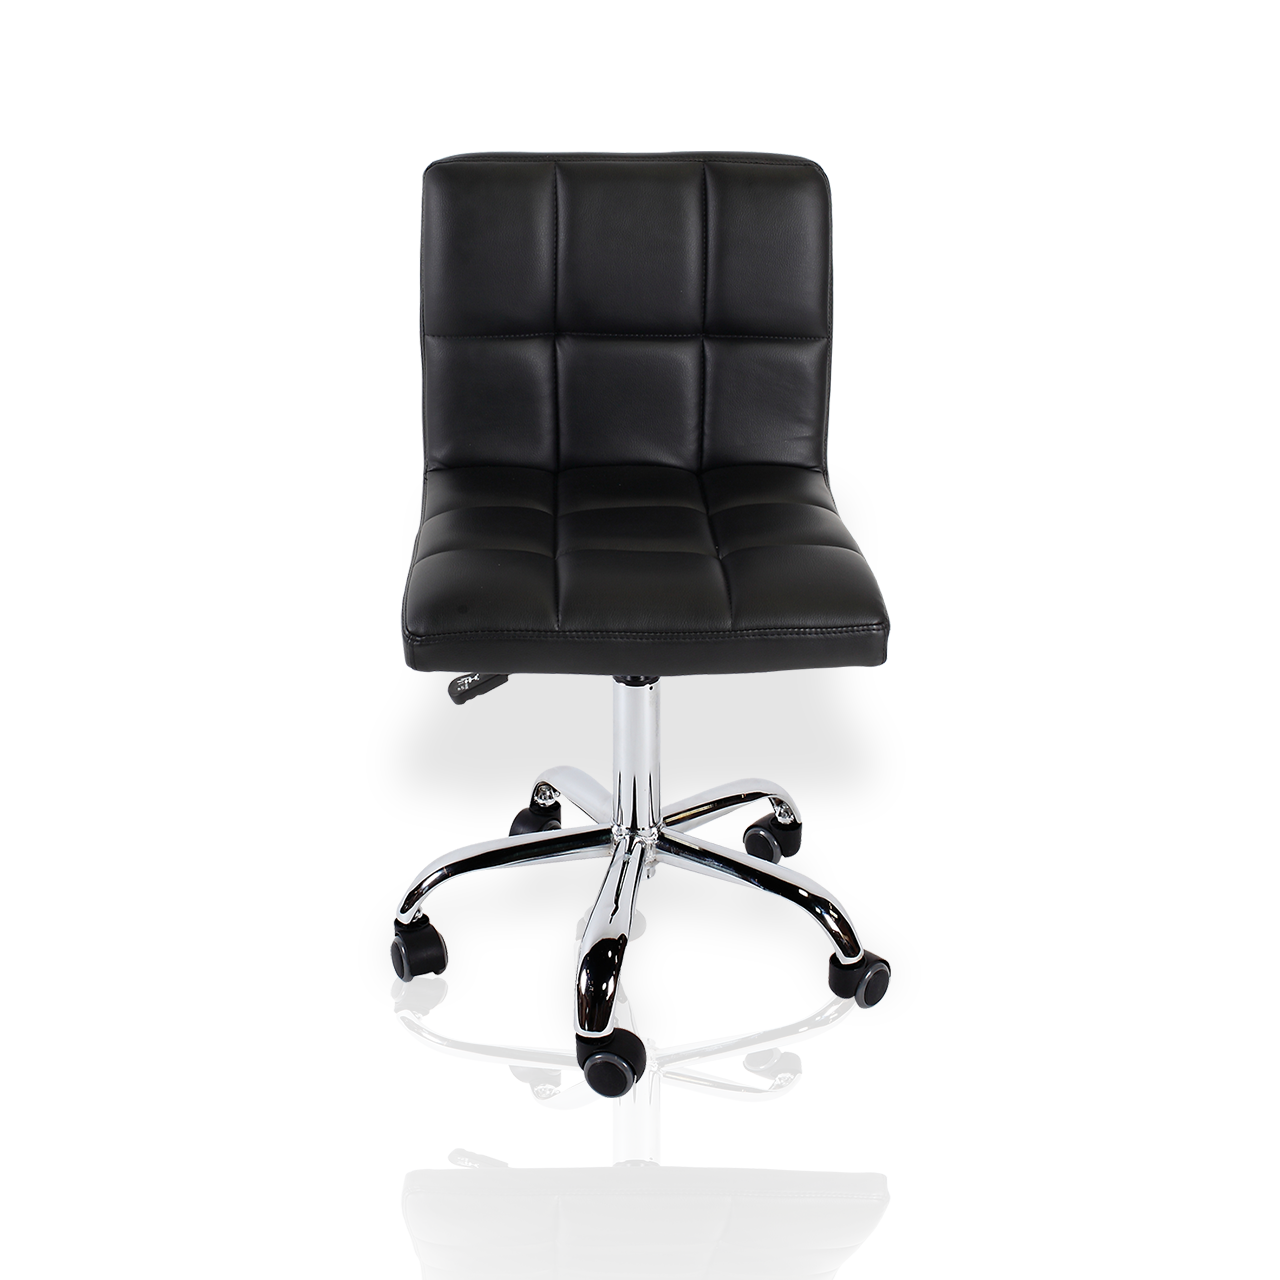 Cookie Technician Stool - Black - J & A Pedicure Spa Chair & Furniture Collection